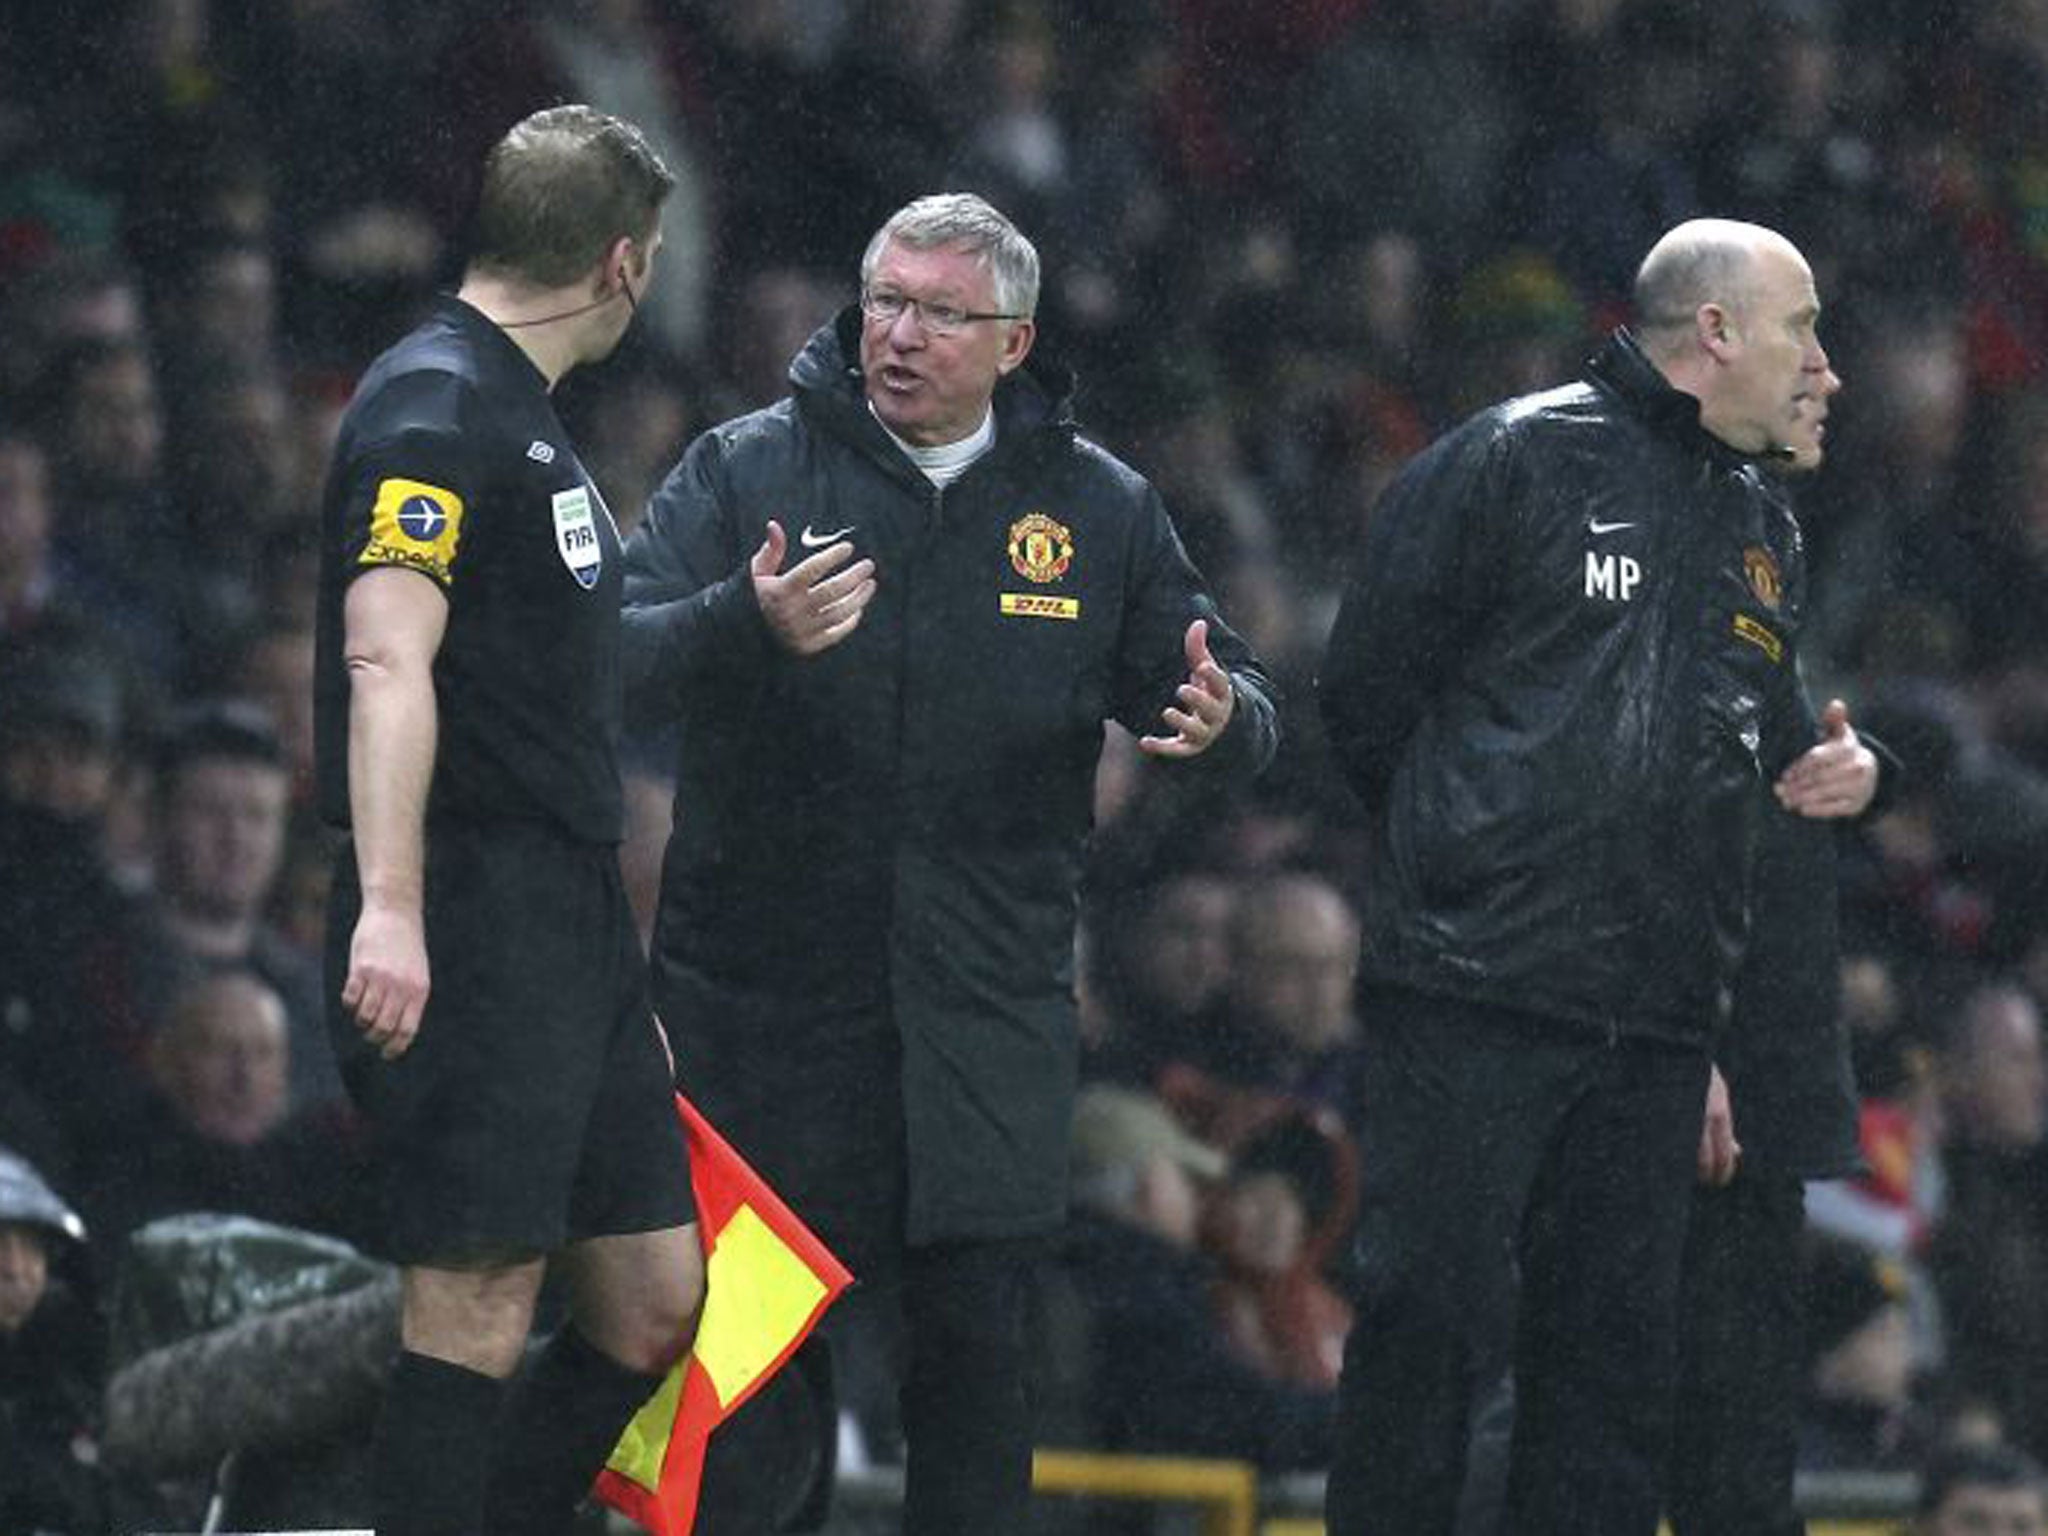 Sir Alex Ferguson in a monstrous mood during Manchester United’s victory over Newcastle United on Boxing Day